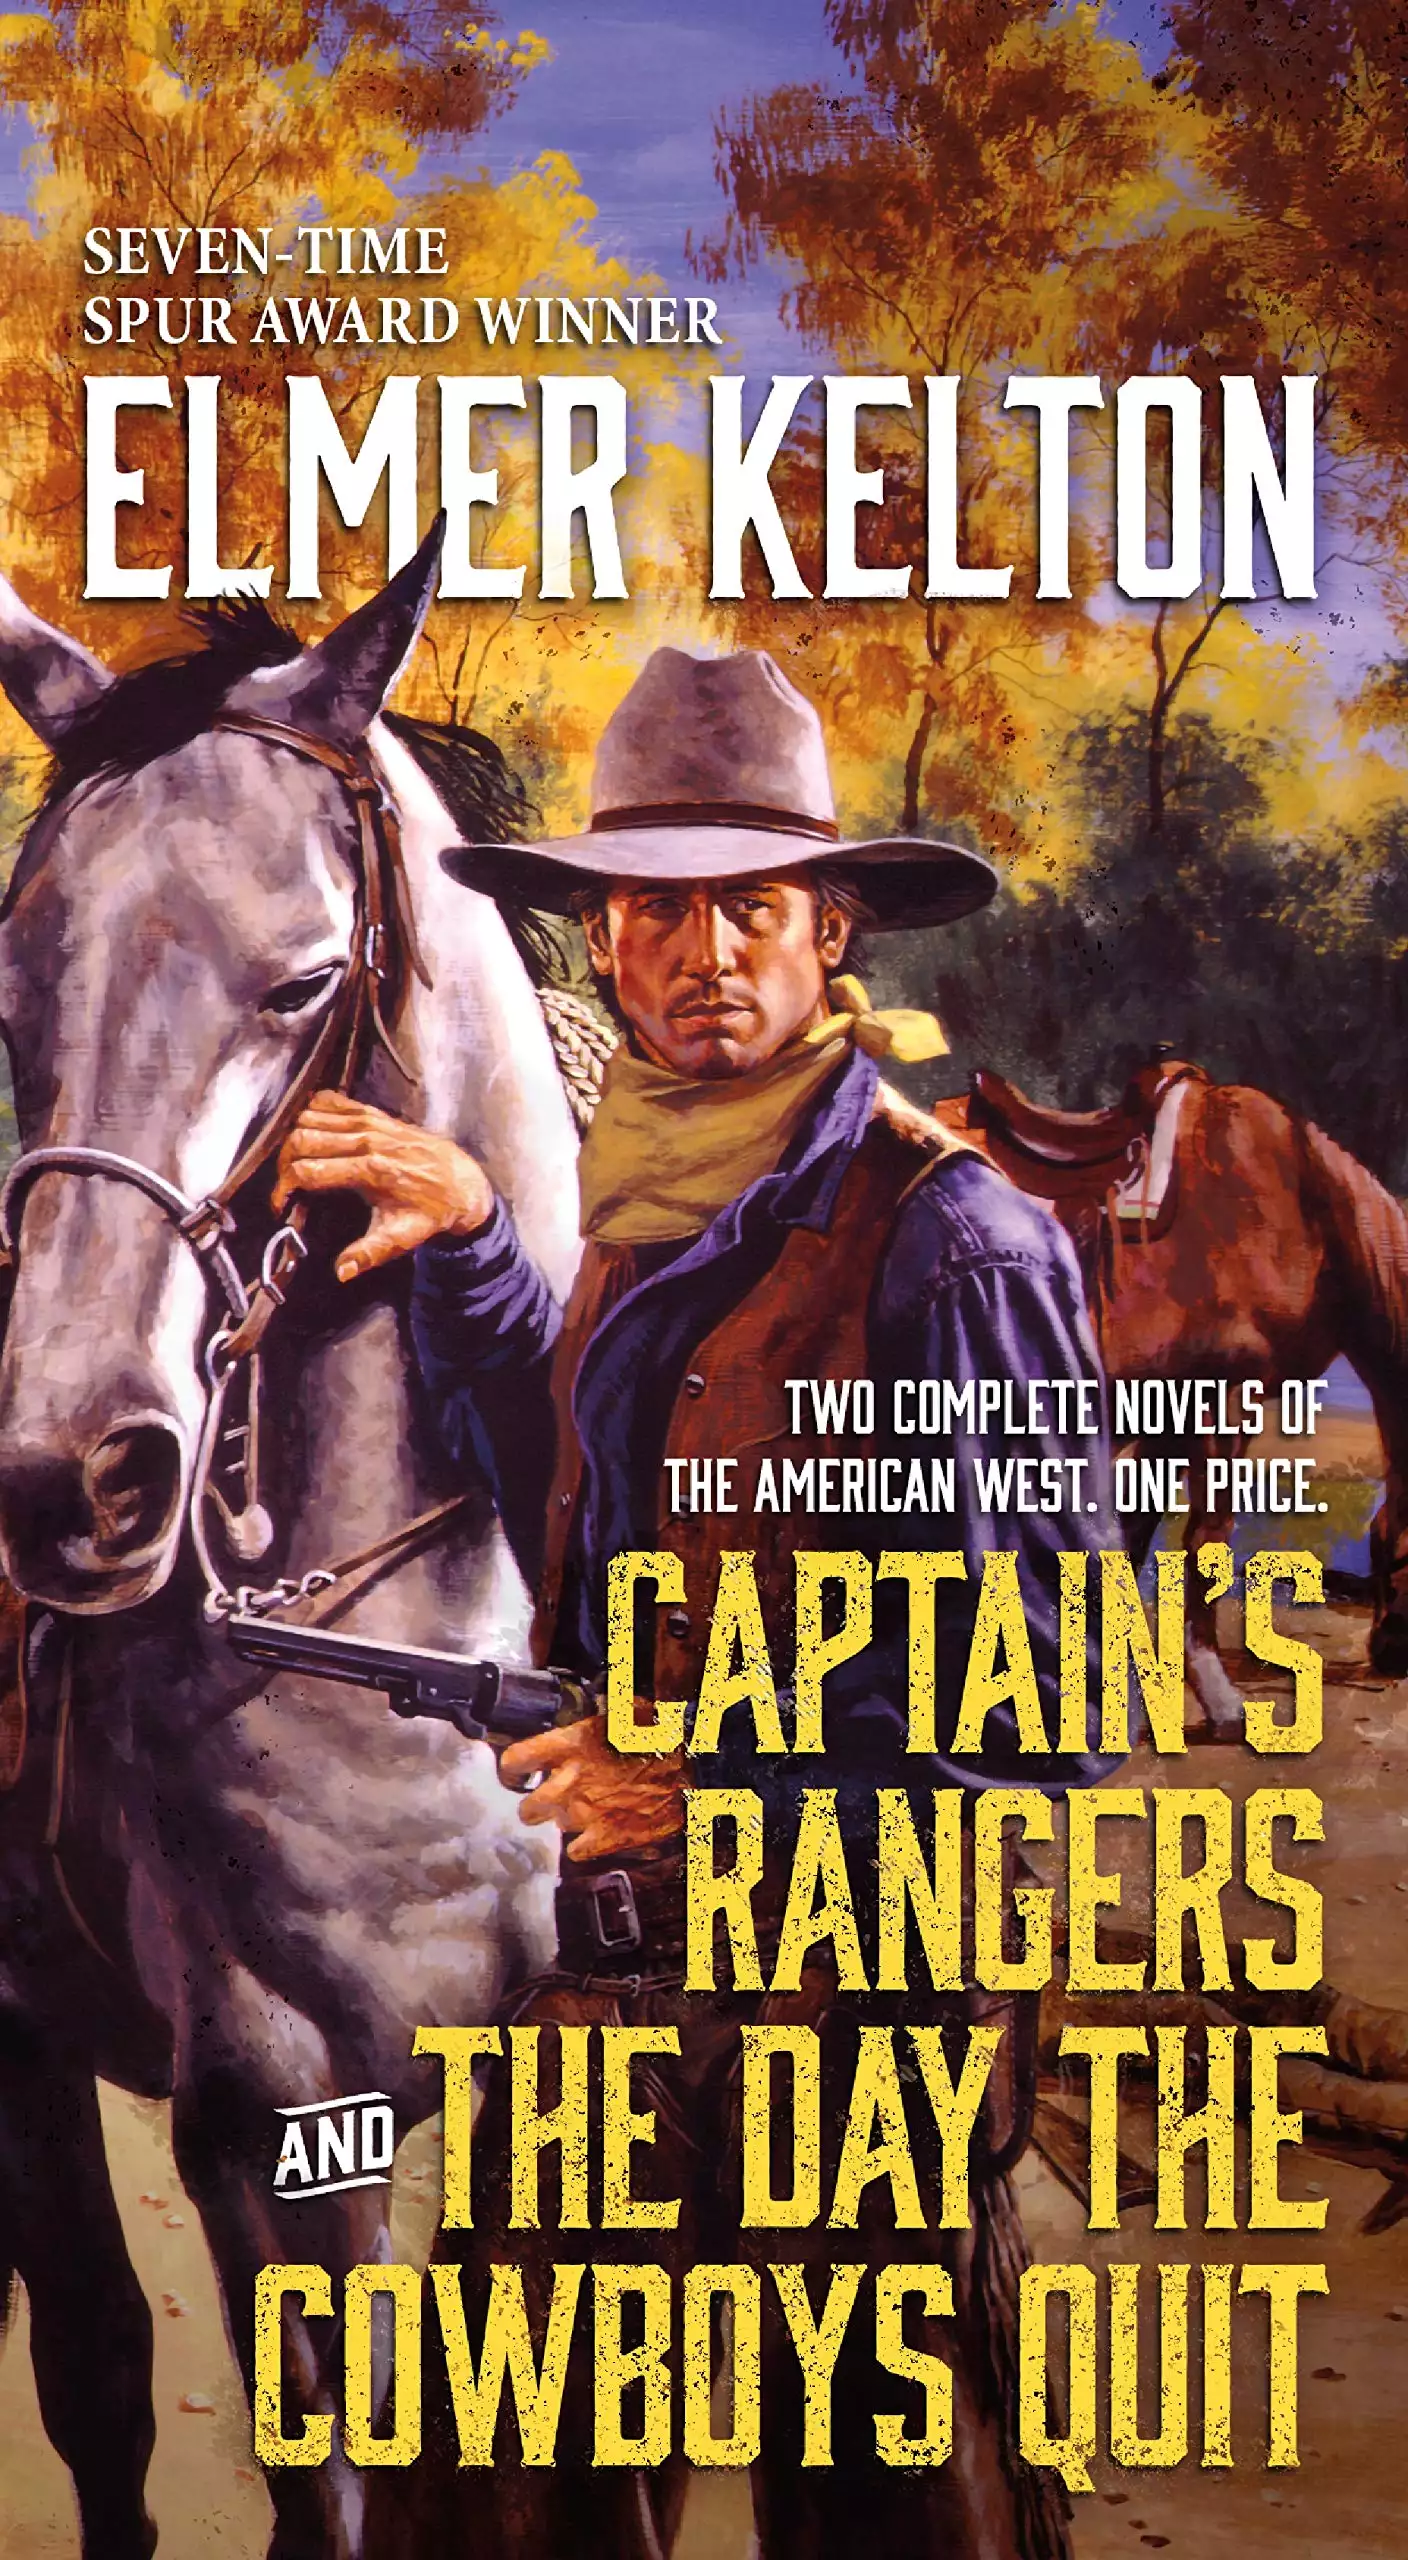 Captain's Rangers and The Day the Cowboys Quit